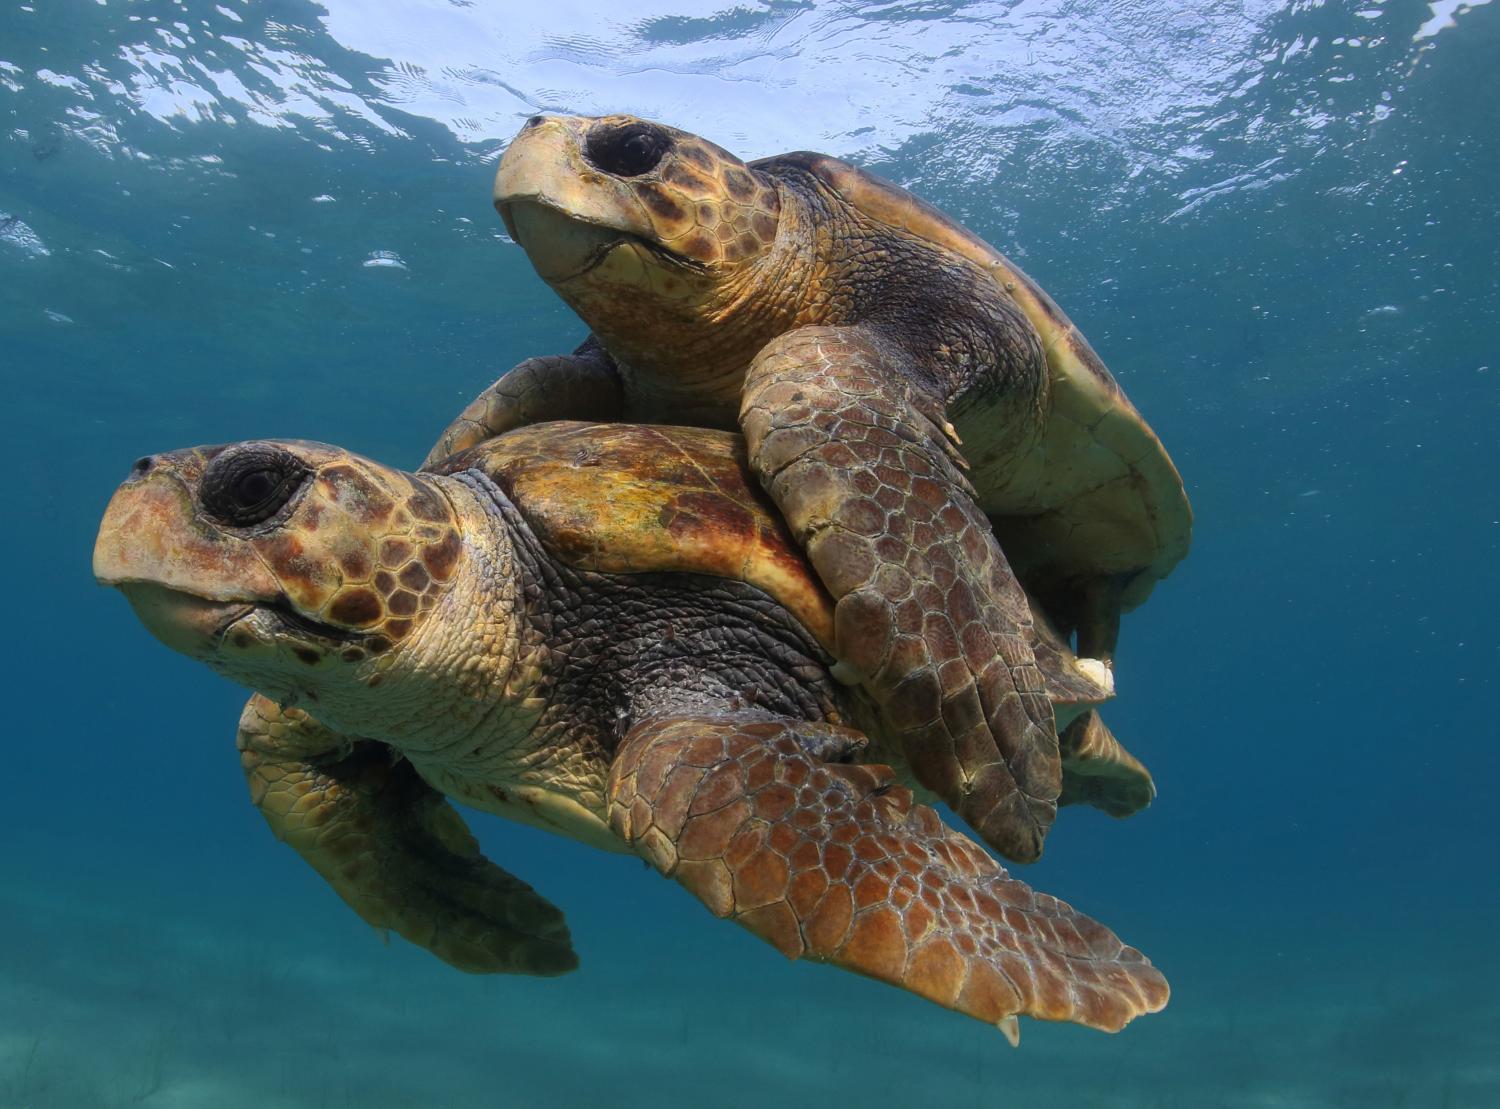 Efforts to save sea turtles are a 'global conservation success story